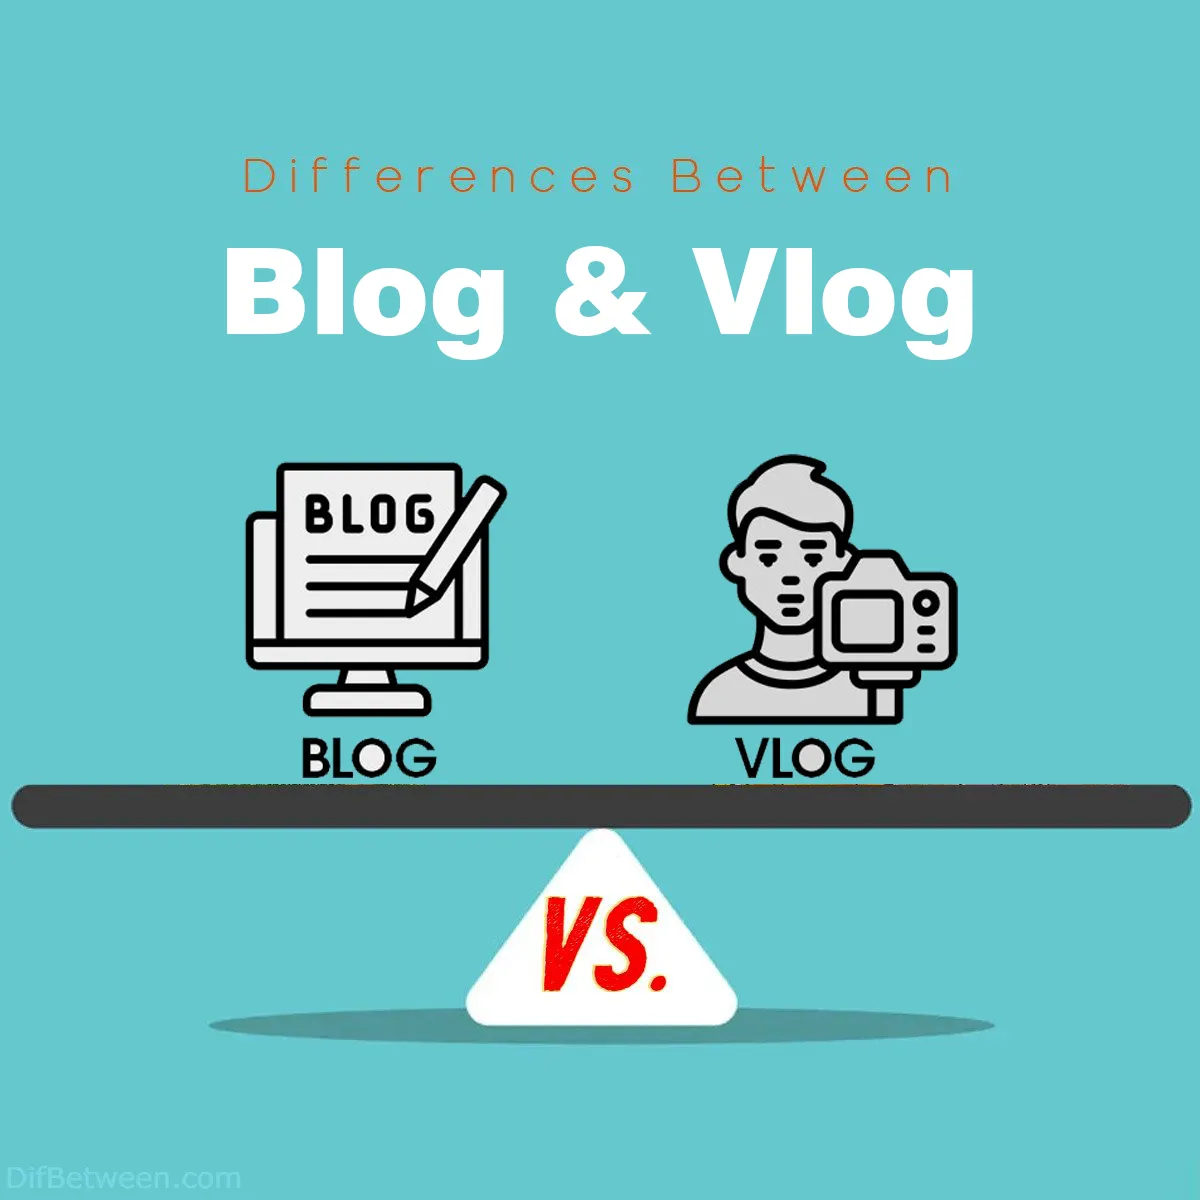 Differences Between Blog and Vlog